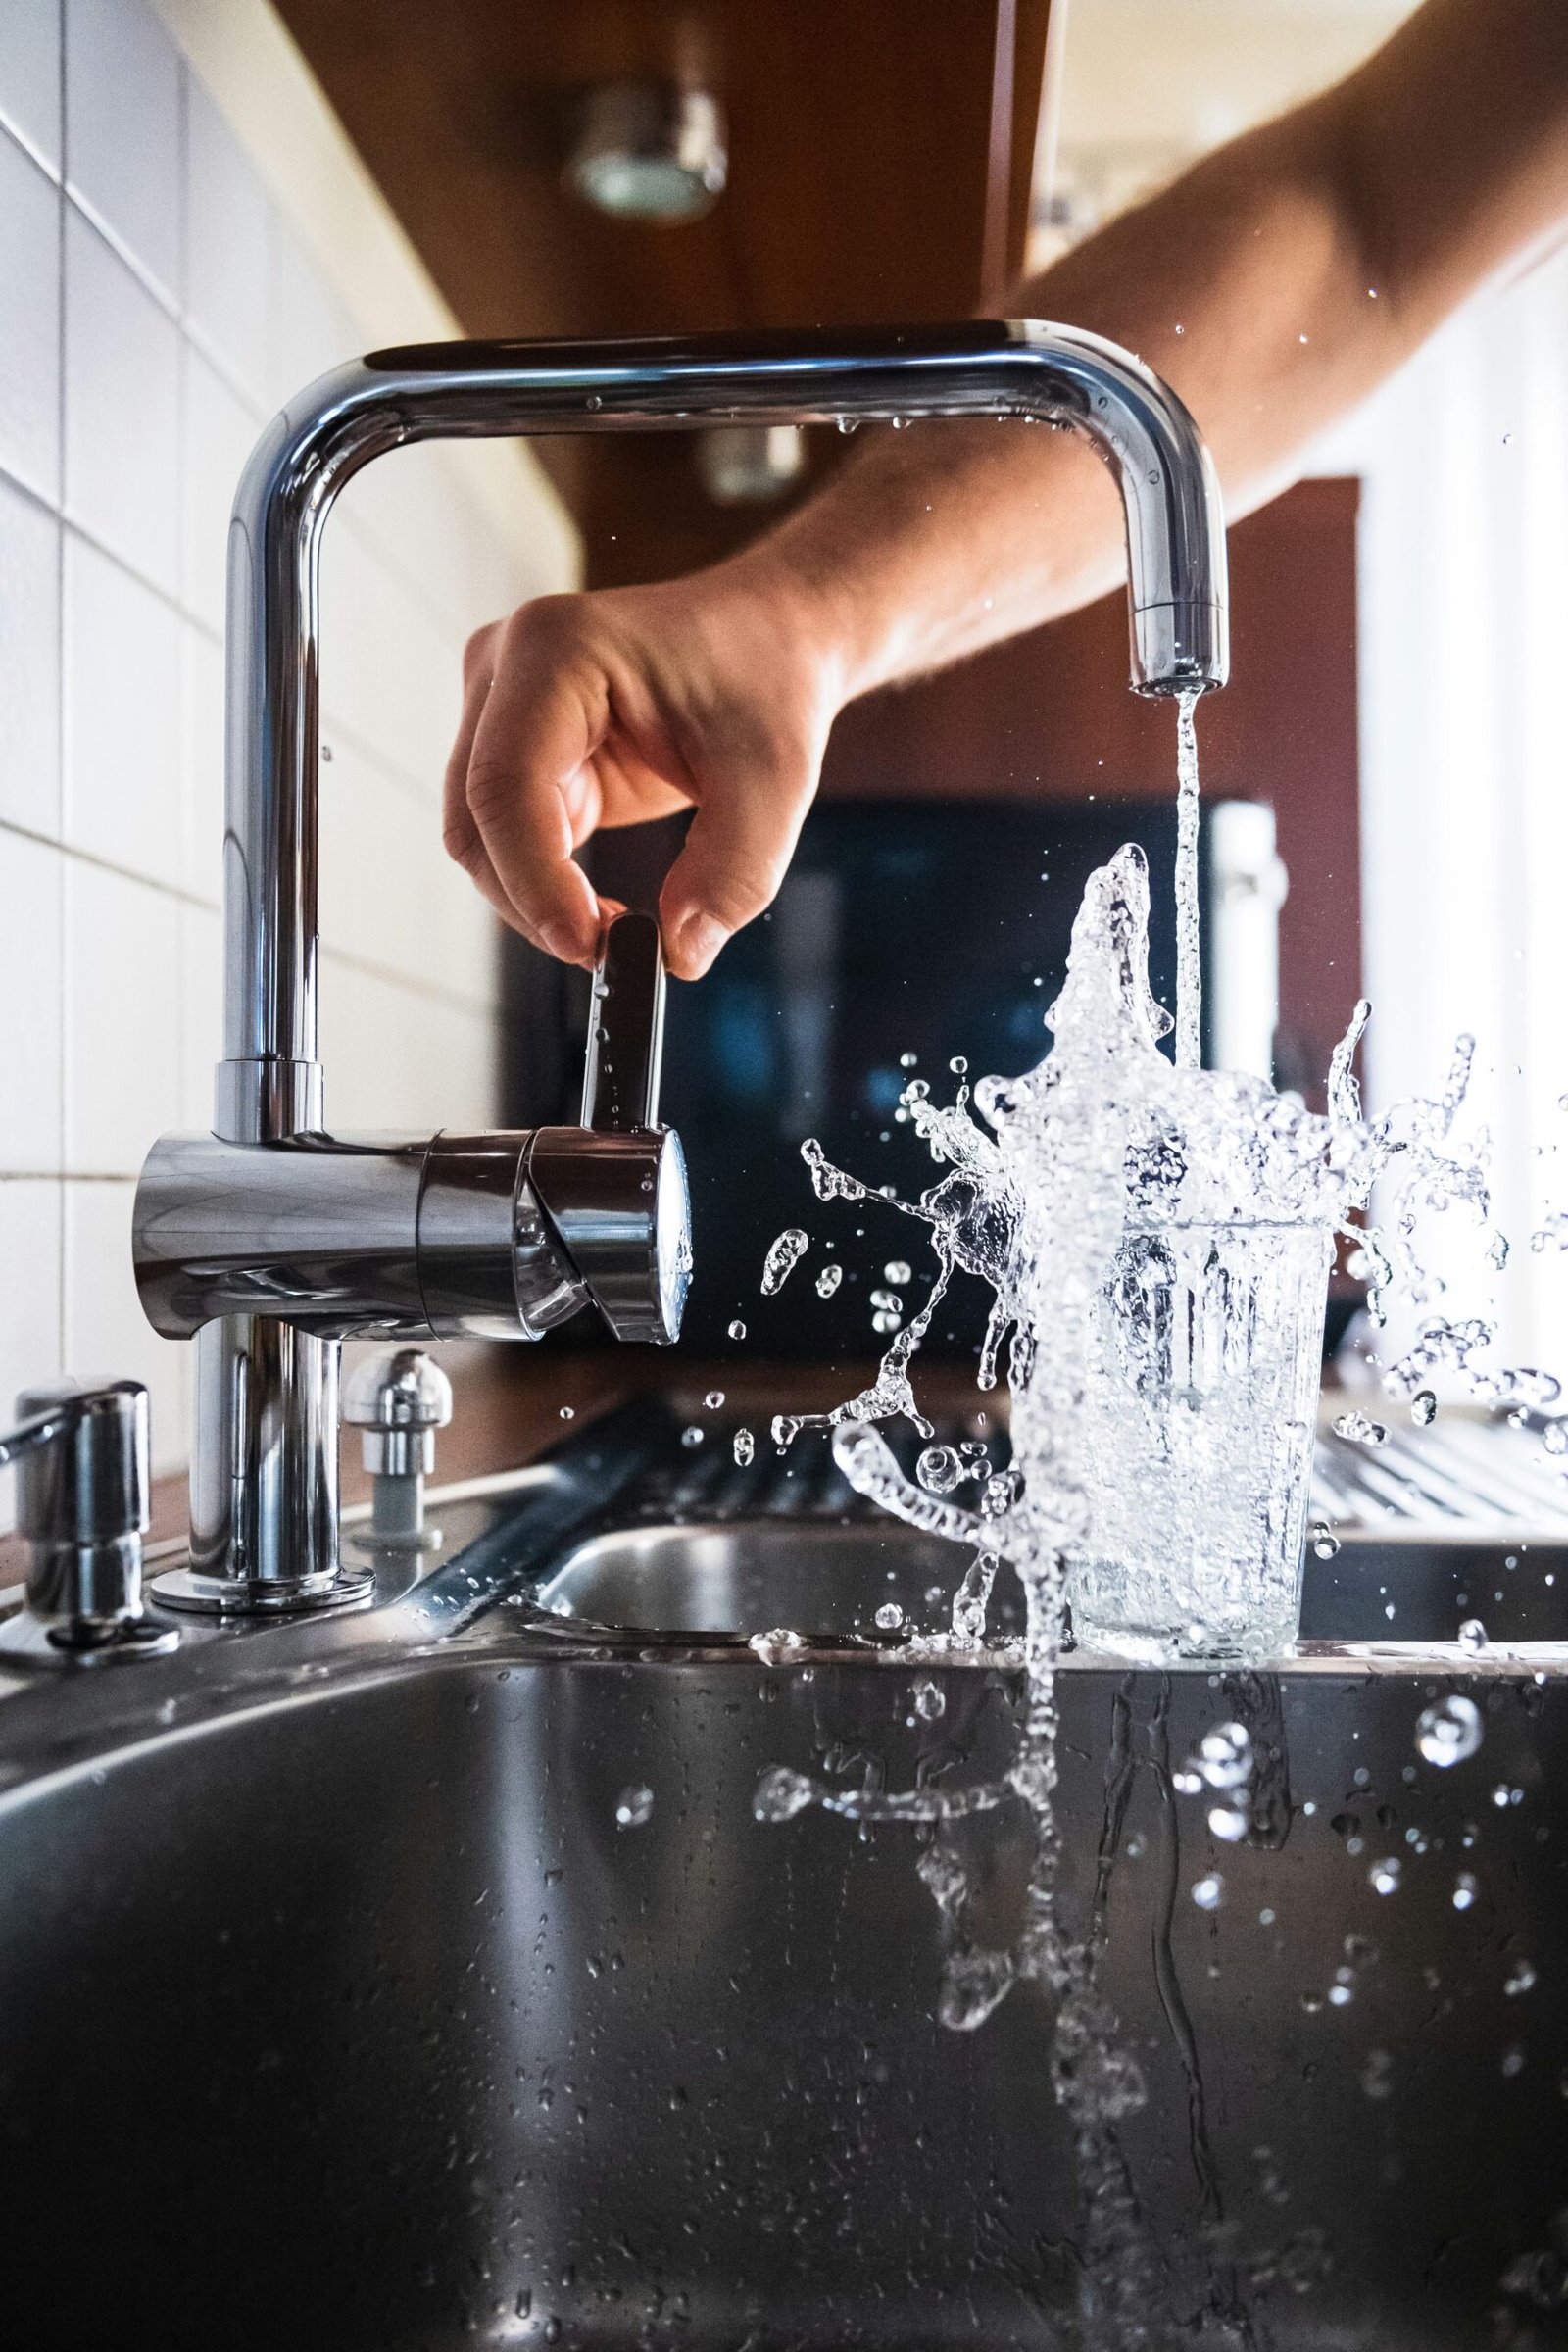 5 Ways to Prevent Plumbing Problems in Your Home